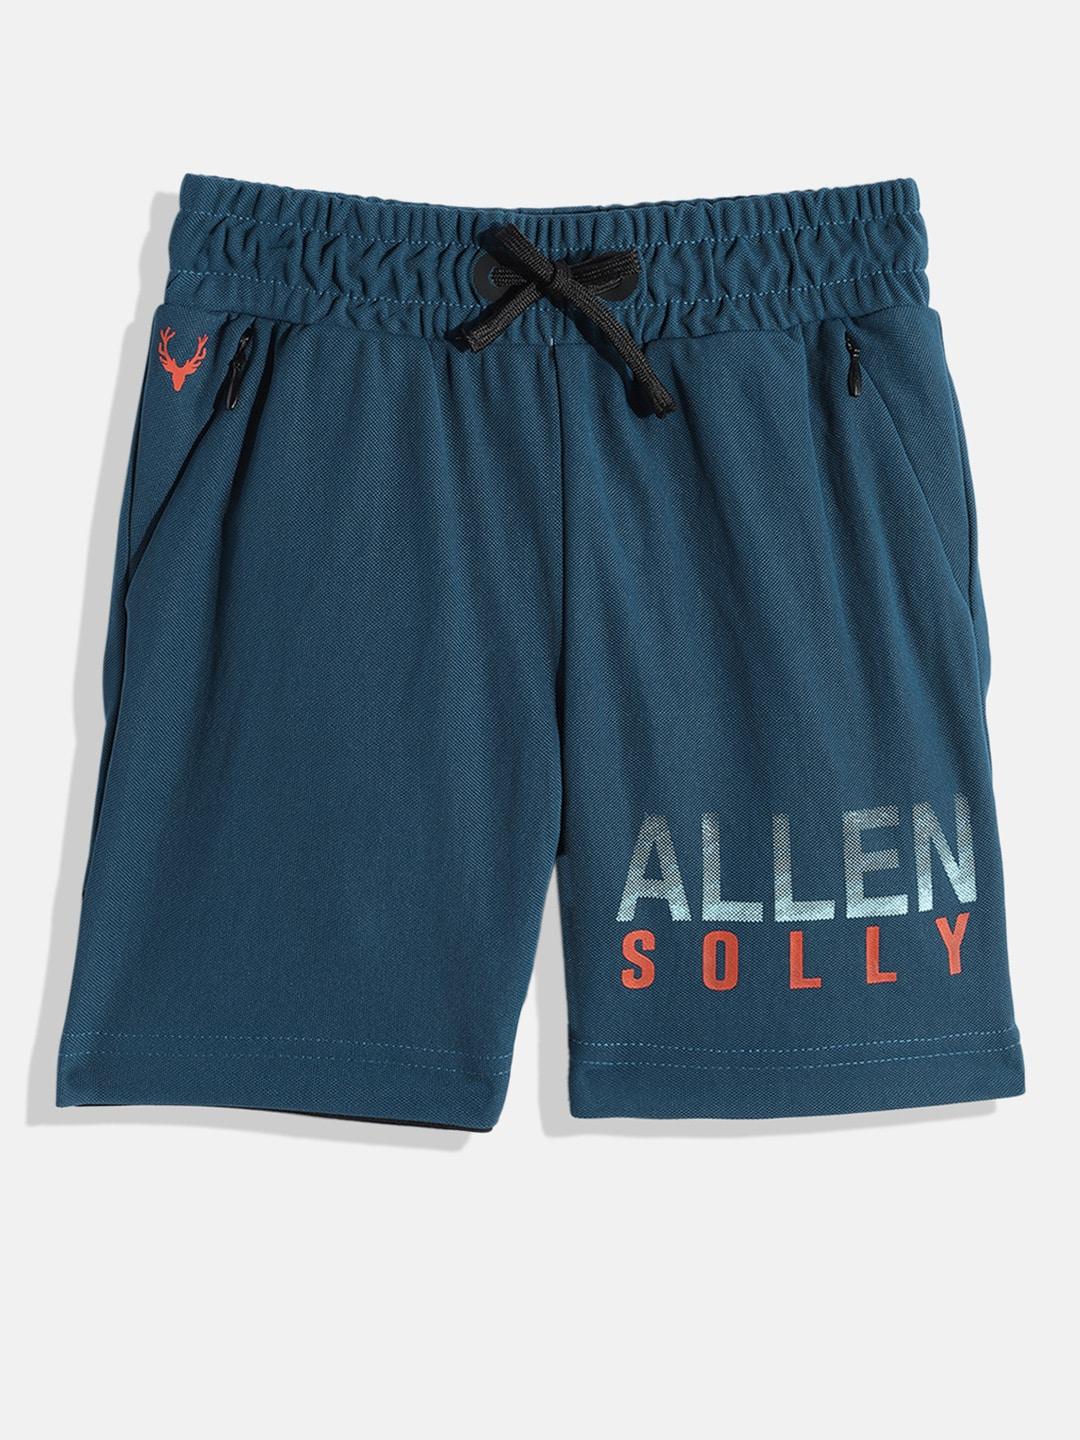 allen solly junior boys teal blue typography printed shorts